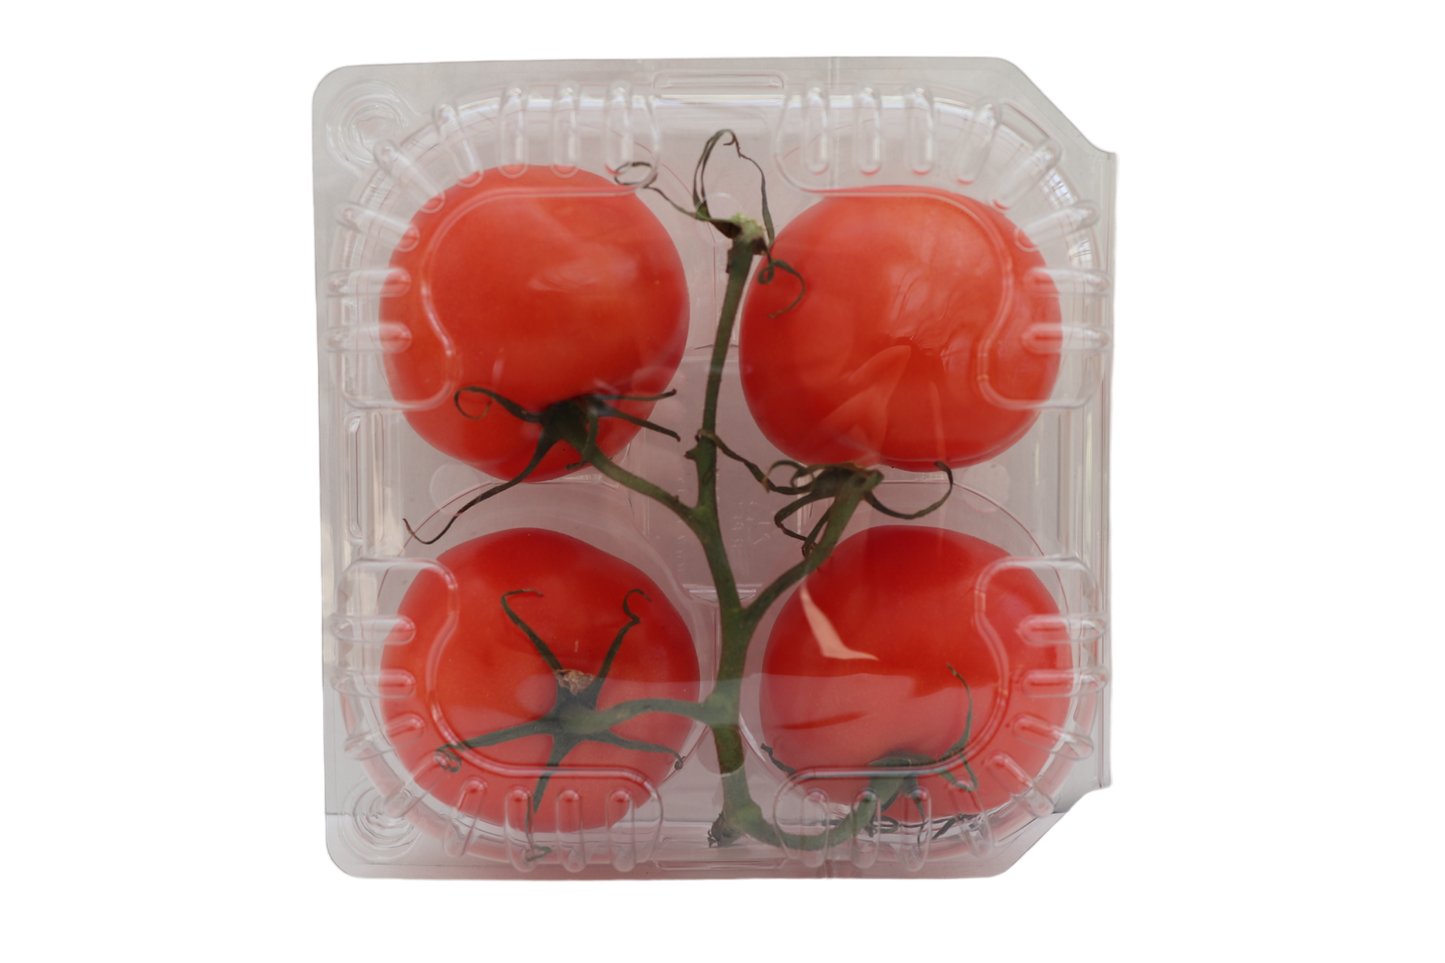 4 Pack of Tomatoes